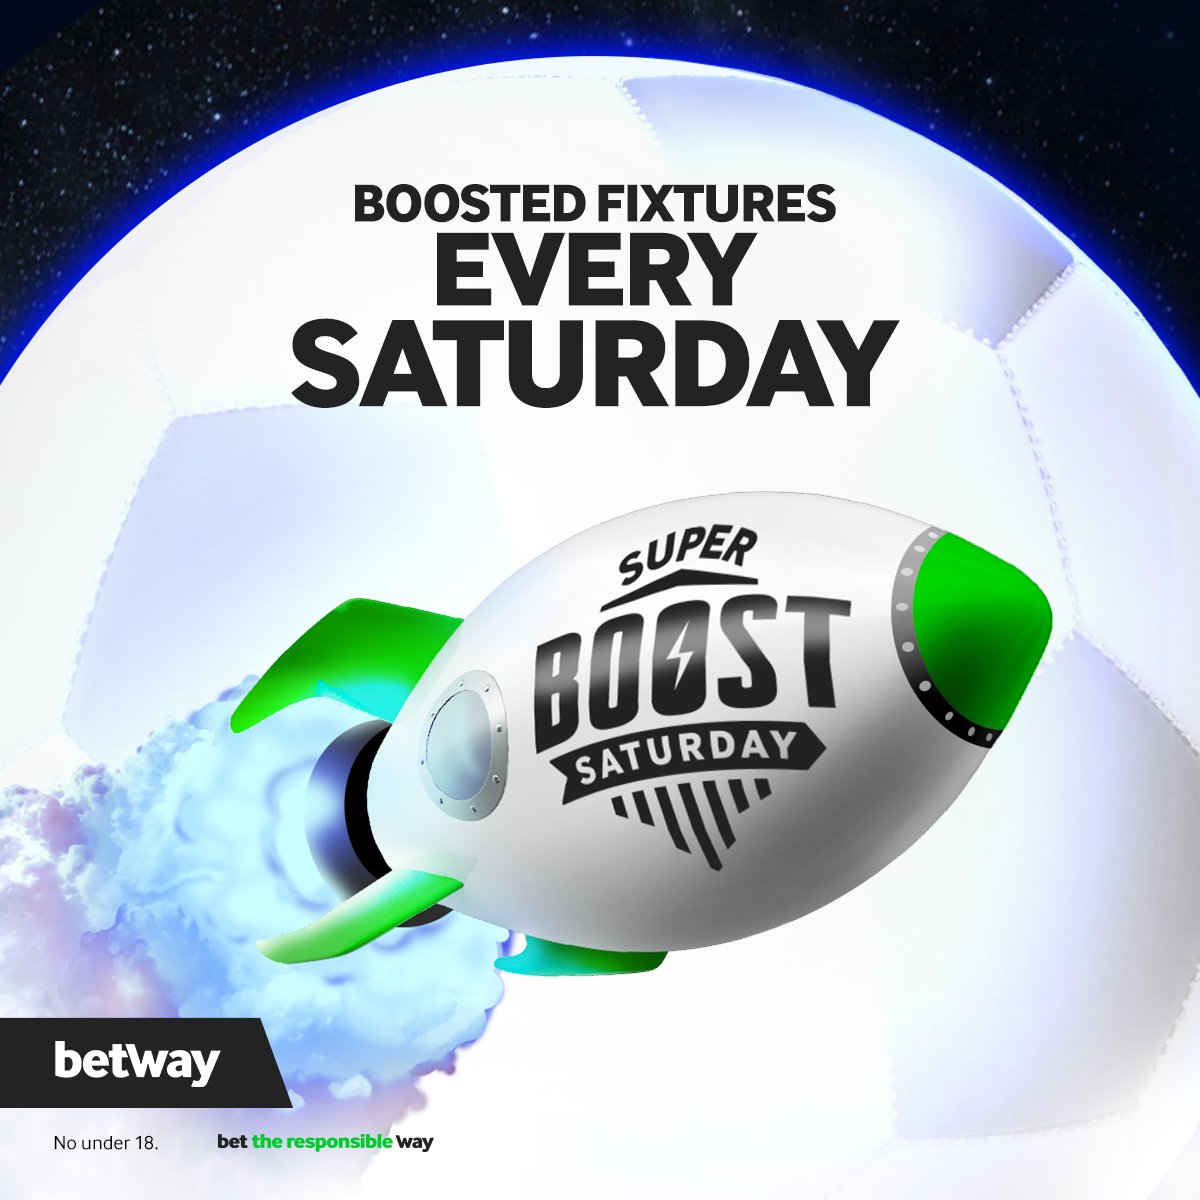 Don’t settle for standard odds. Every Saturday, get way more with #SuperBoostSaturday where we choose combo bet types (1X2 & Total Goals, 1X2 & Both Teams to Score, etc.) to boost on big Saturday fixtures. Check this out to get boosted👉 bit.ly/41DJN6M